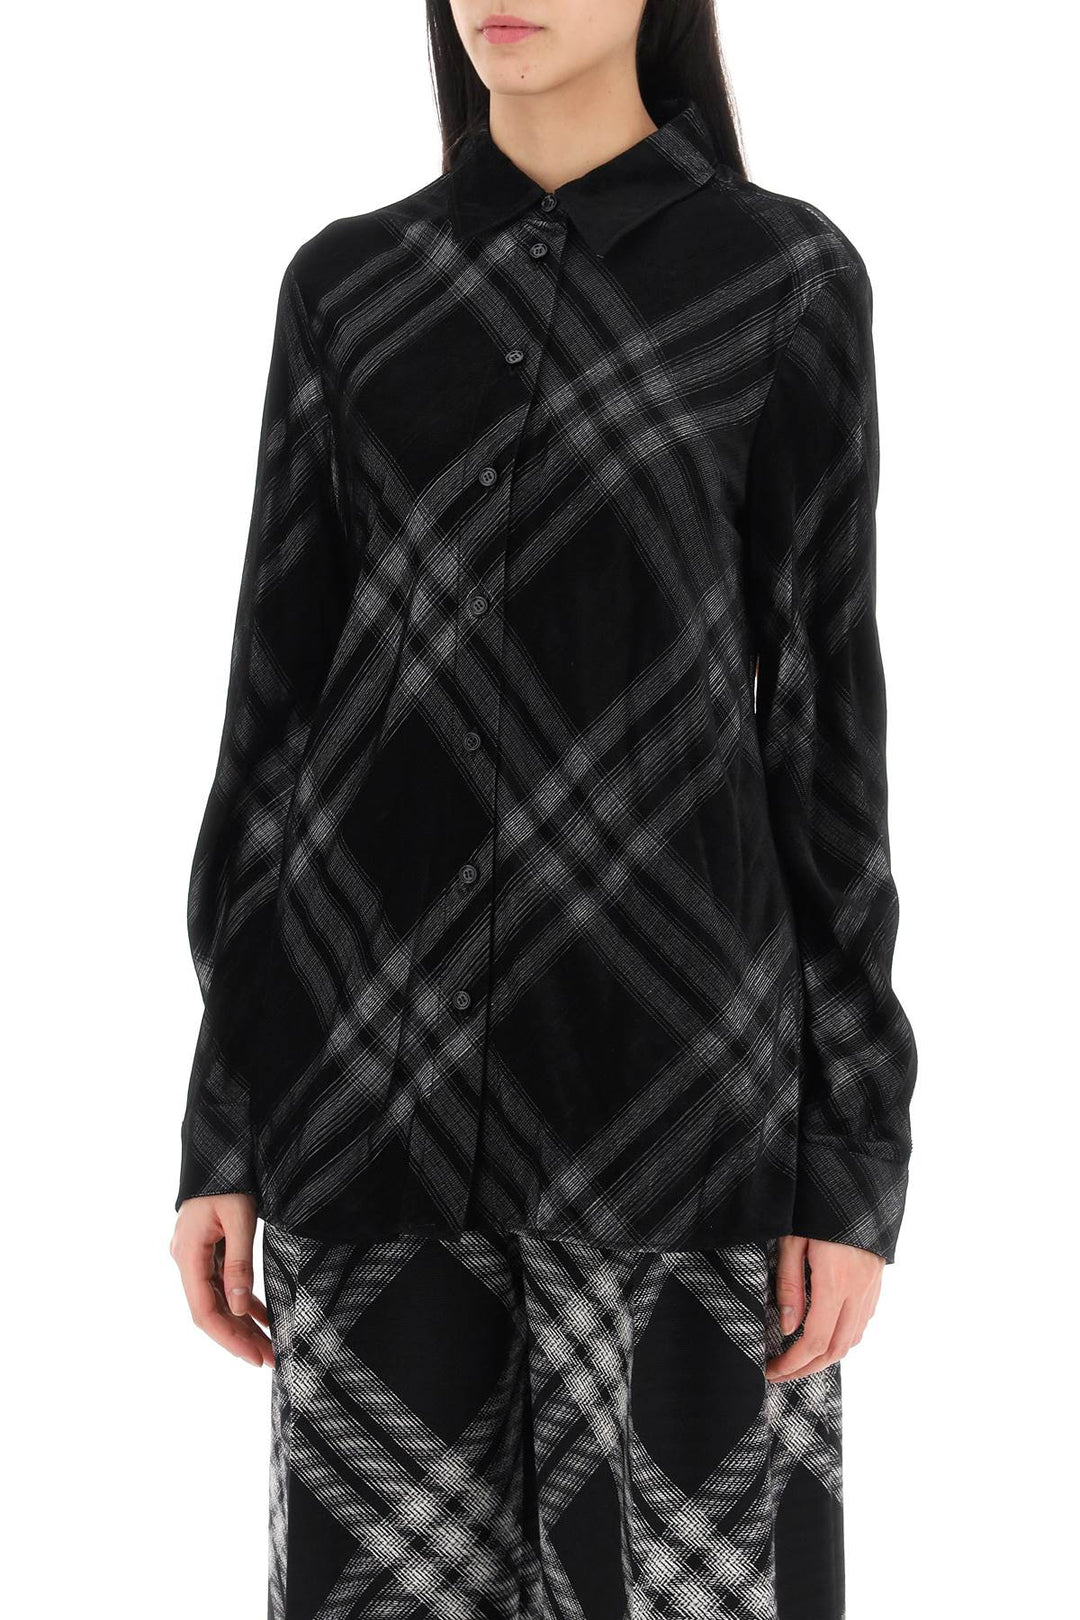 Burberry Replace With Double Quotecheckered Corduroy   Nero